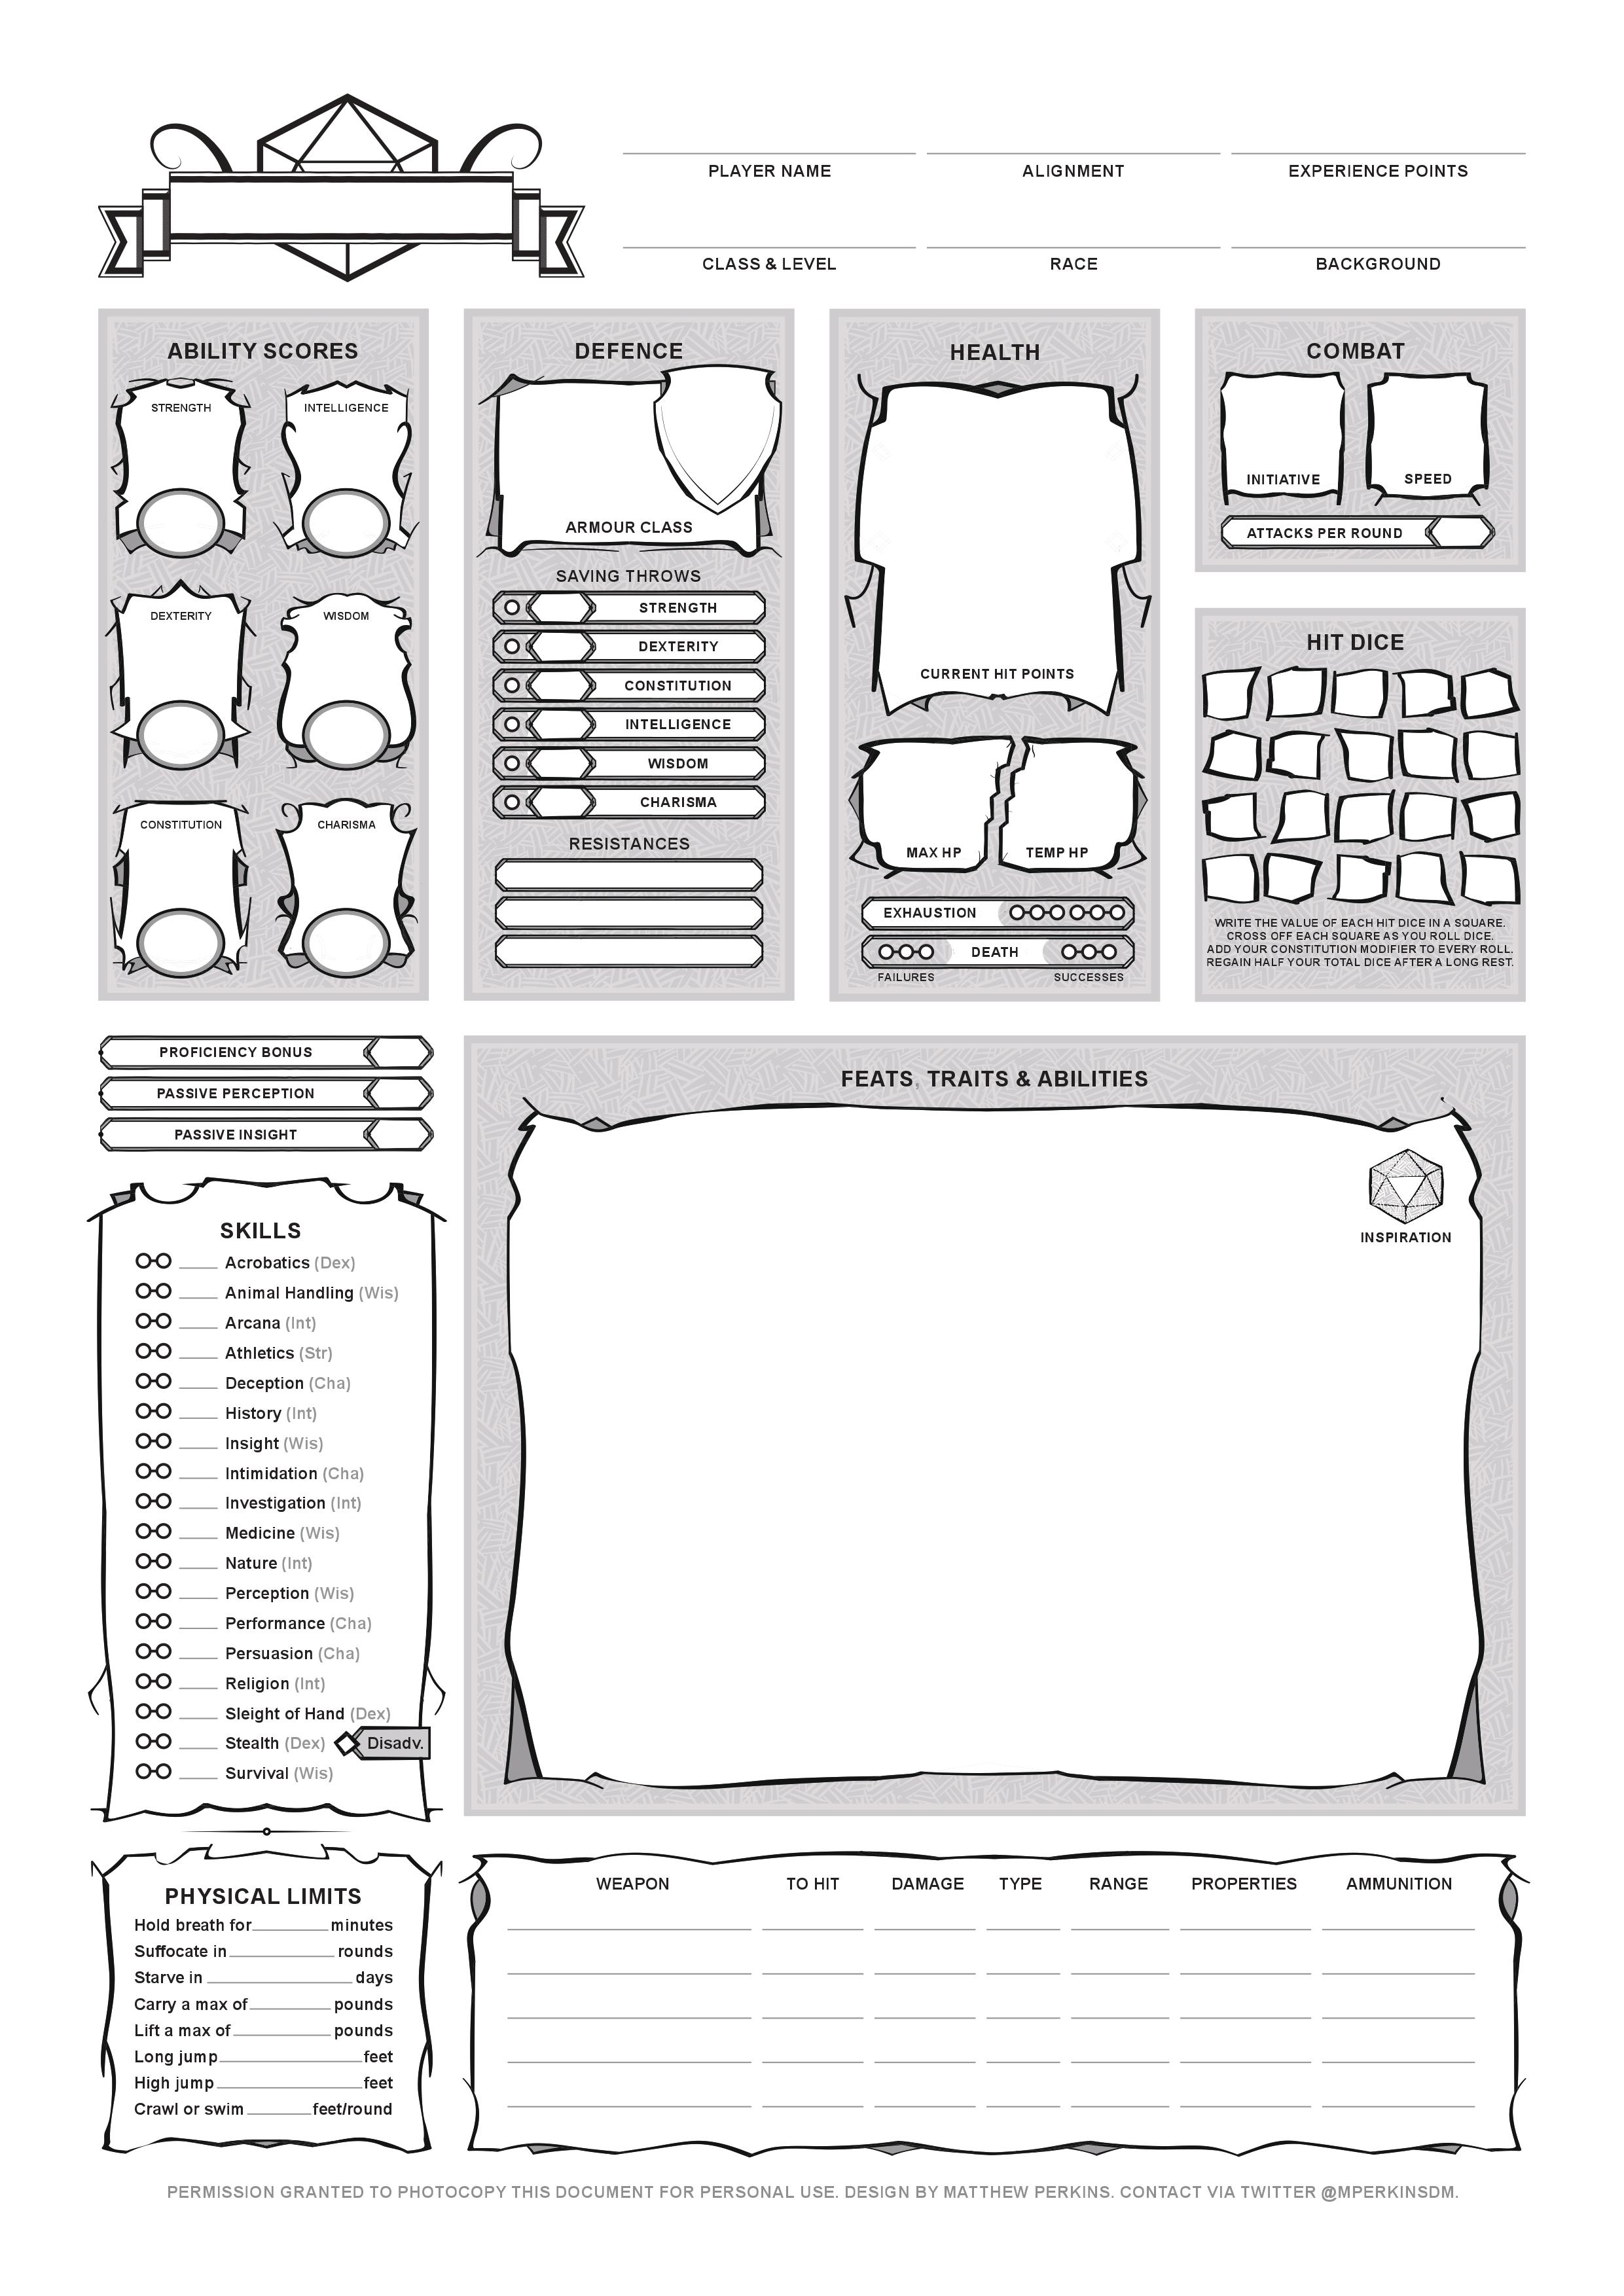 some character sheets